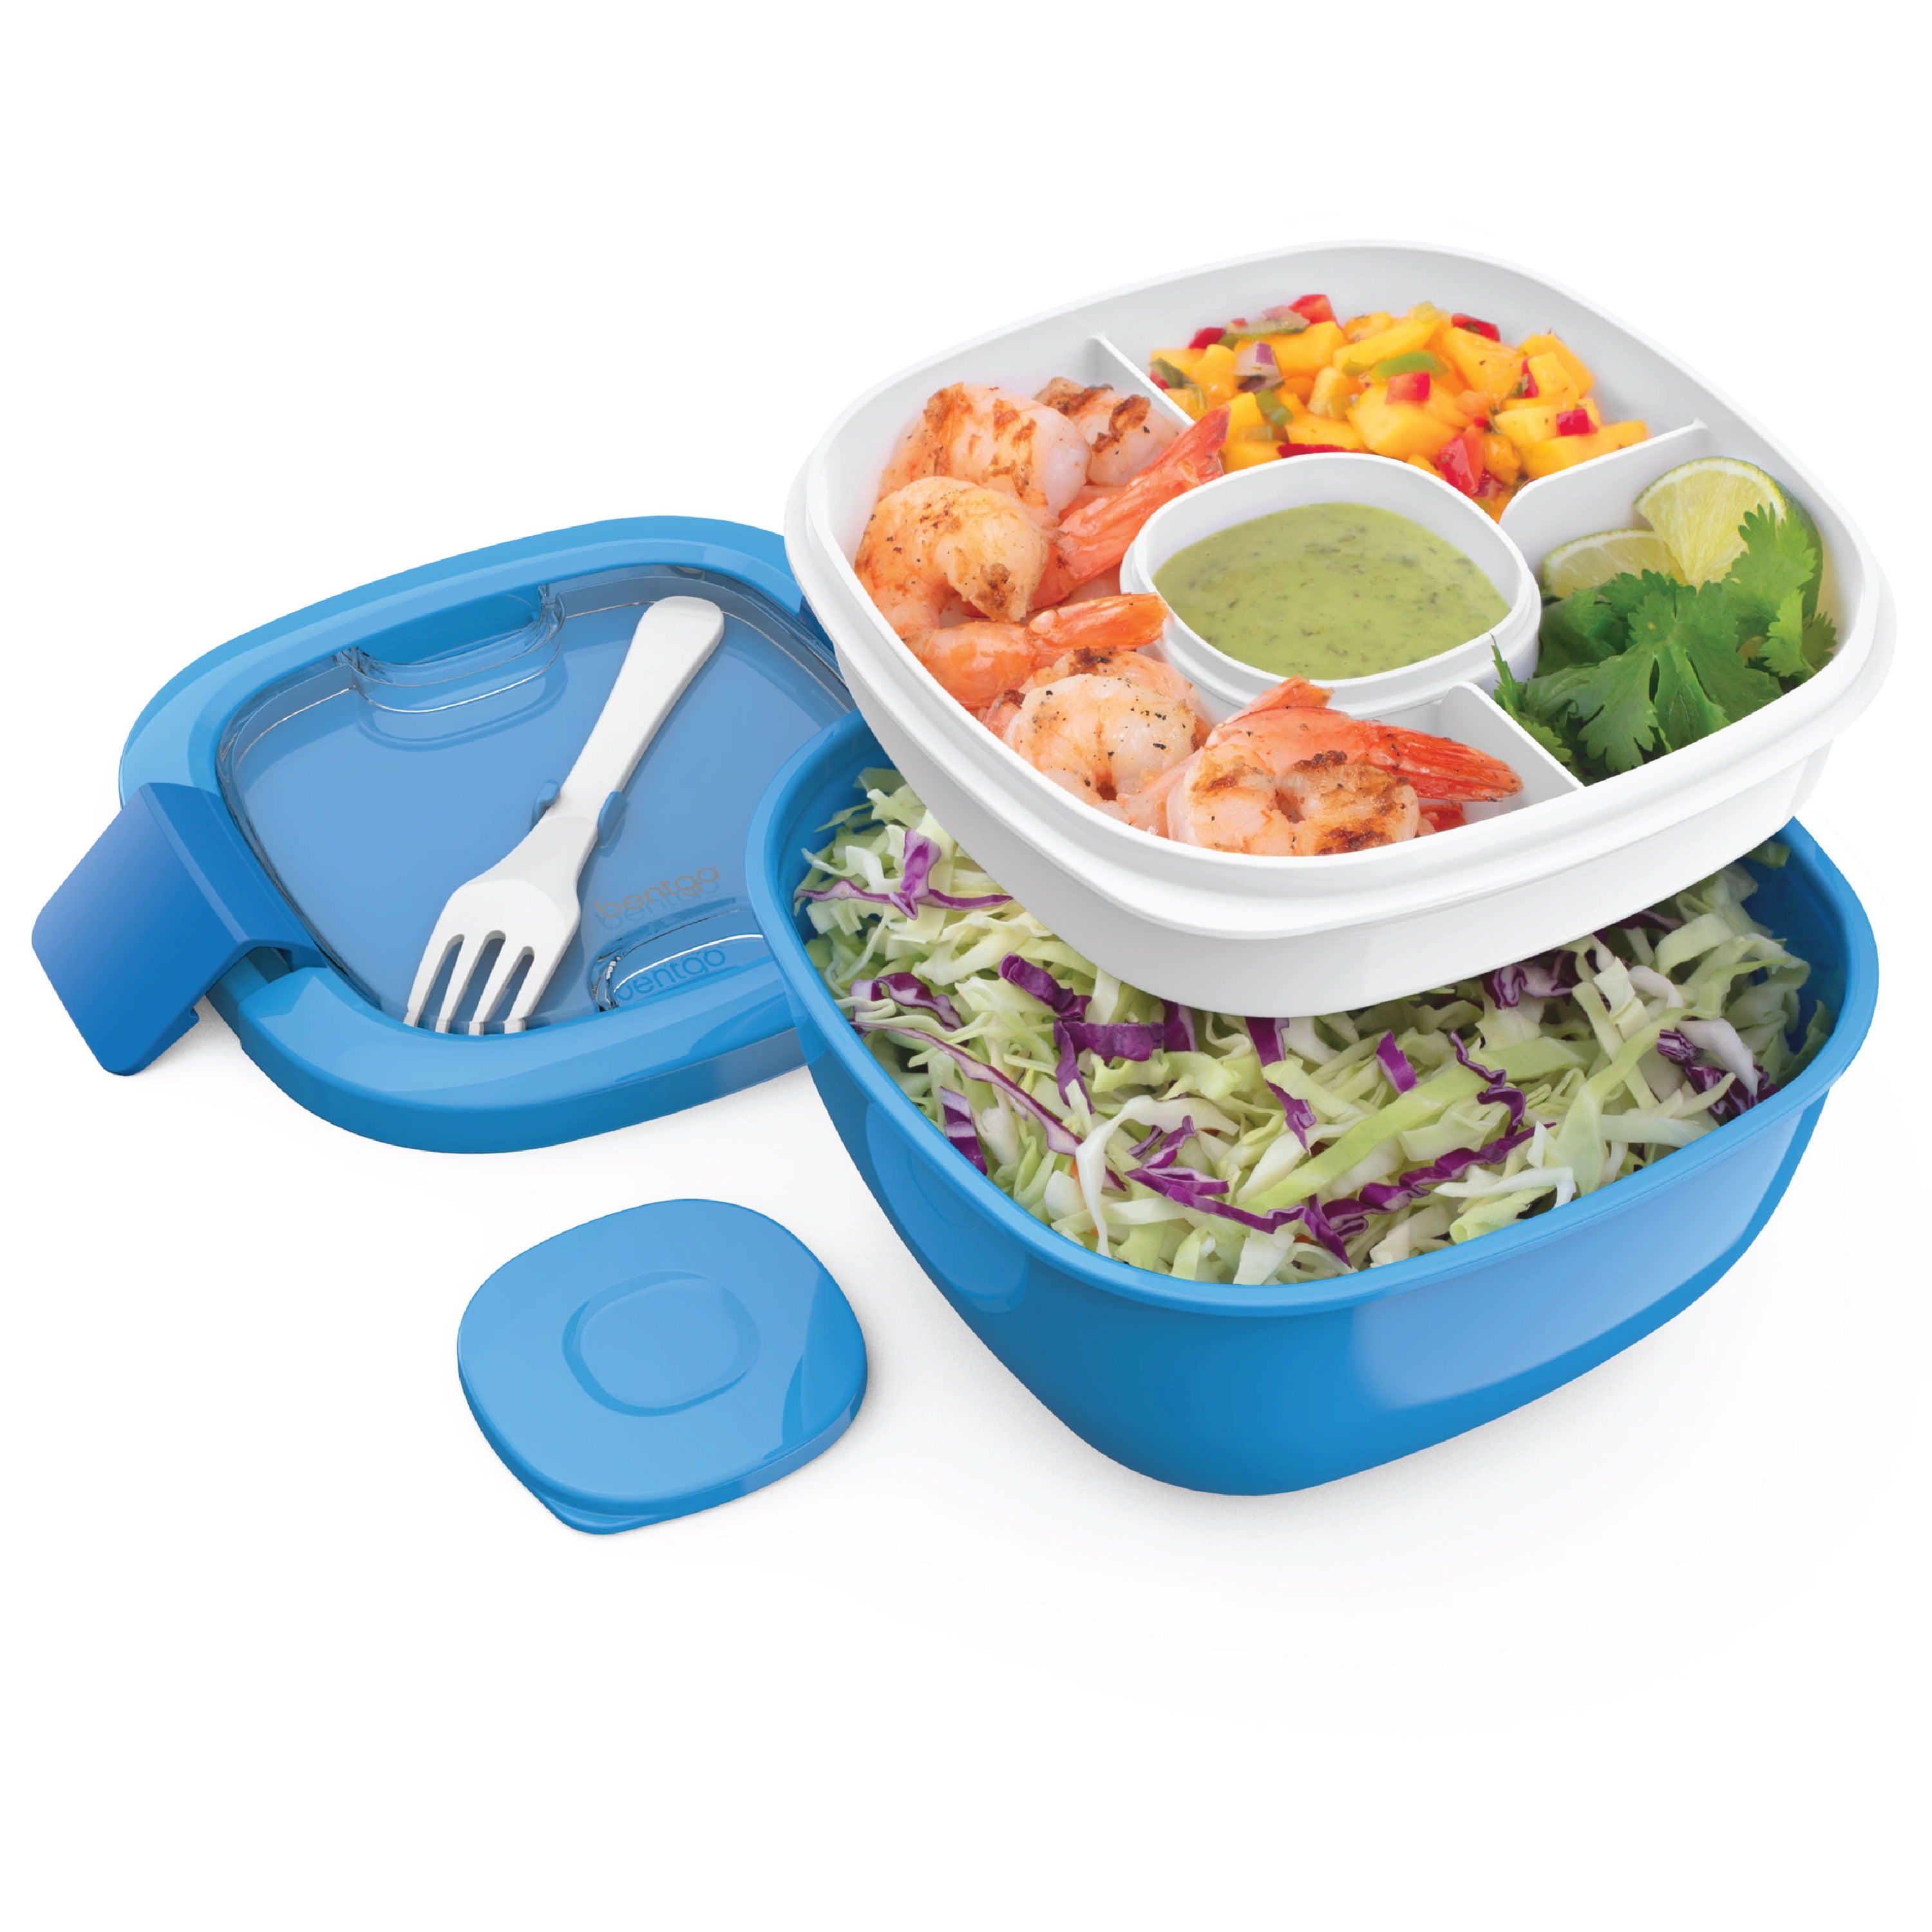 Ylebs Bento Box Salad Lunch Containers with Compartments,Salad Bowl with  Bento-Style Tray and Dressing Sauce Container,Leak-Proof Lunch Box for